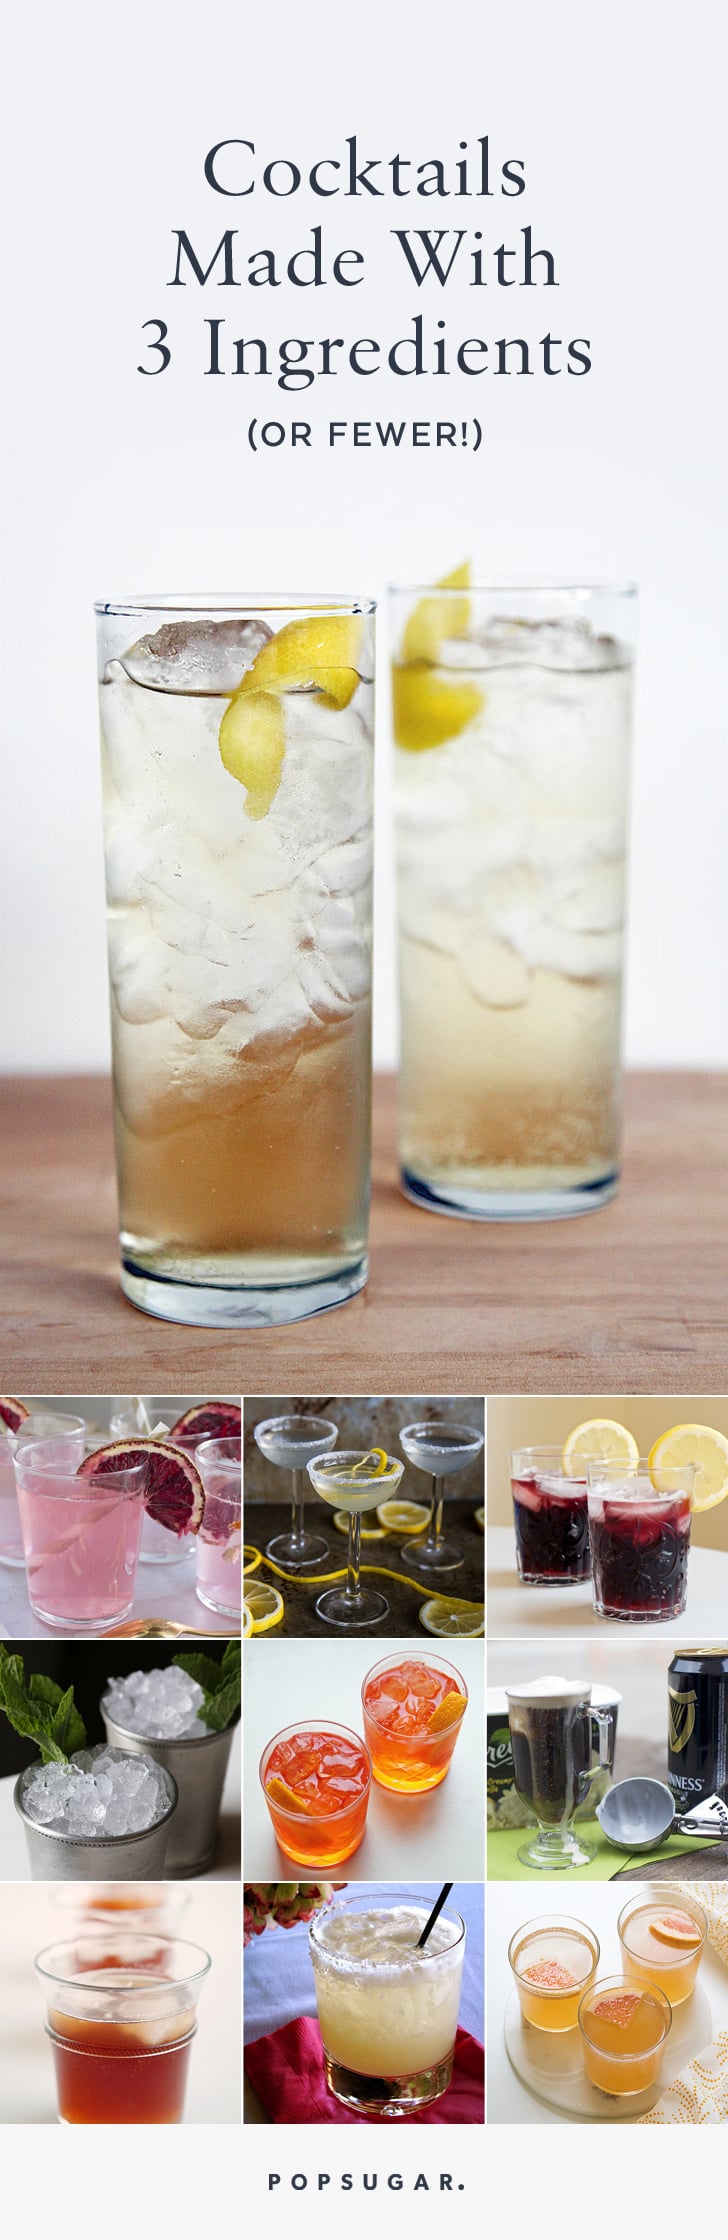 Easy Cocktail Recipes